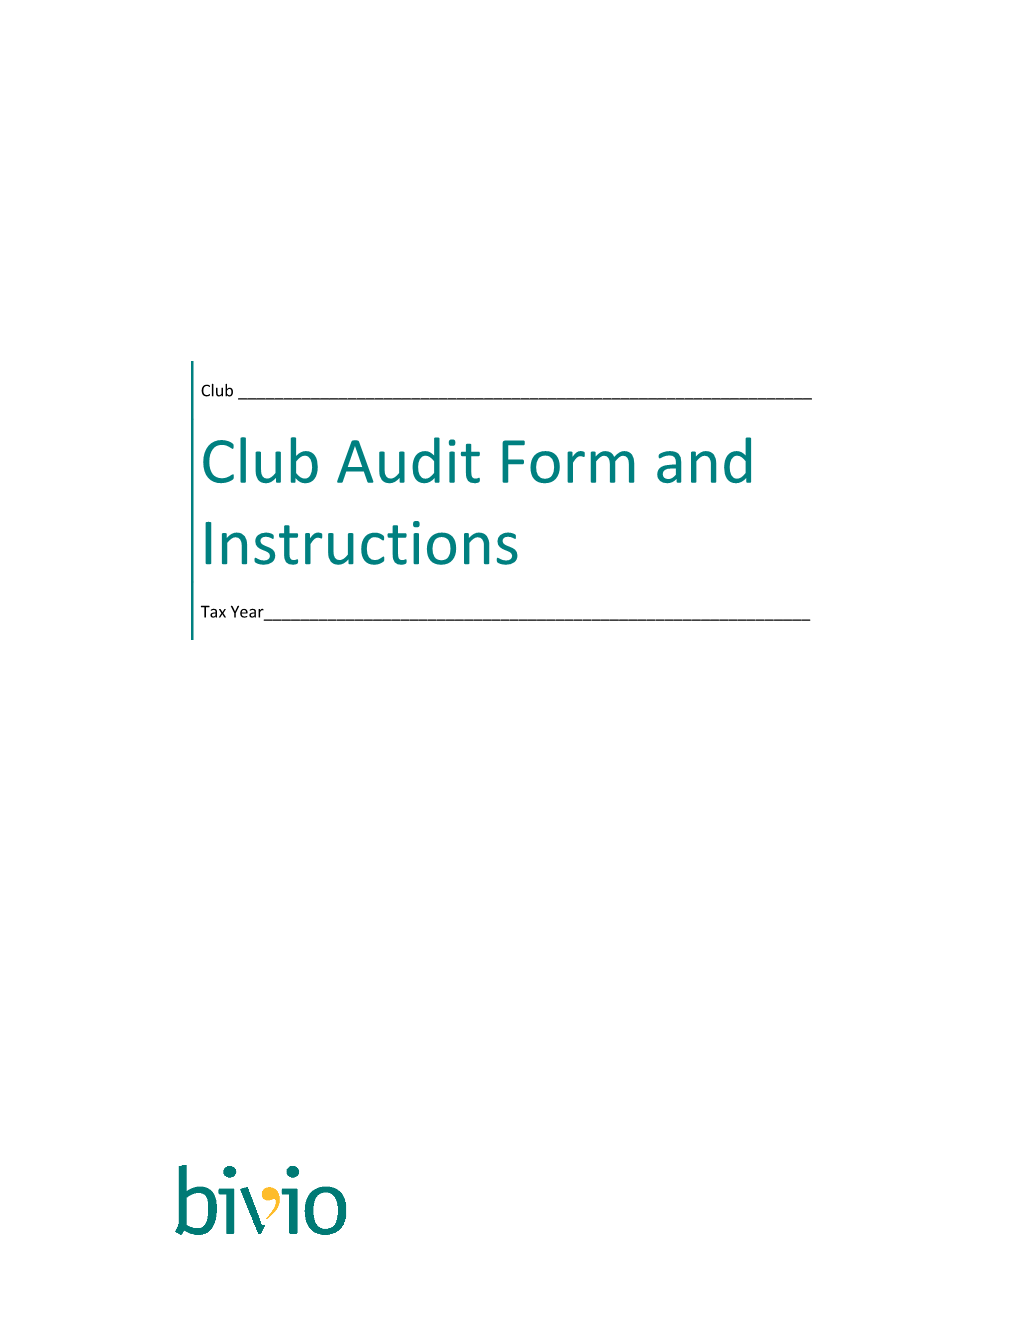 Club Audit Form and Instructions